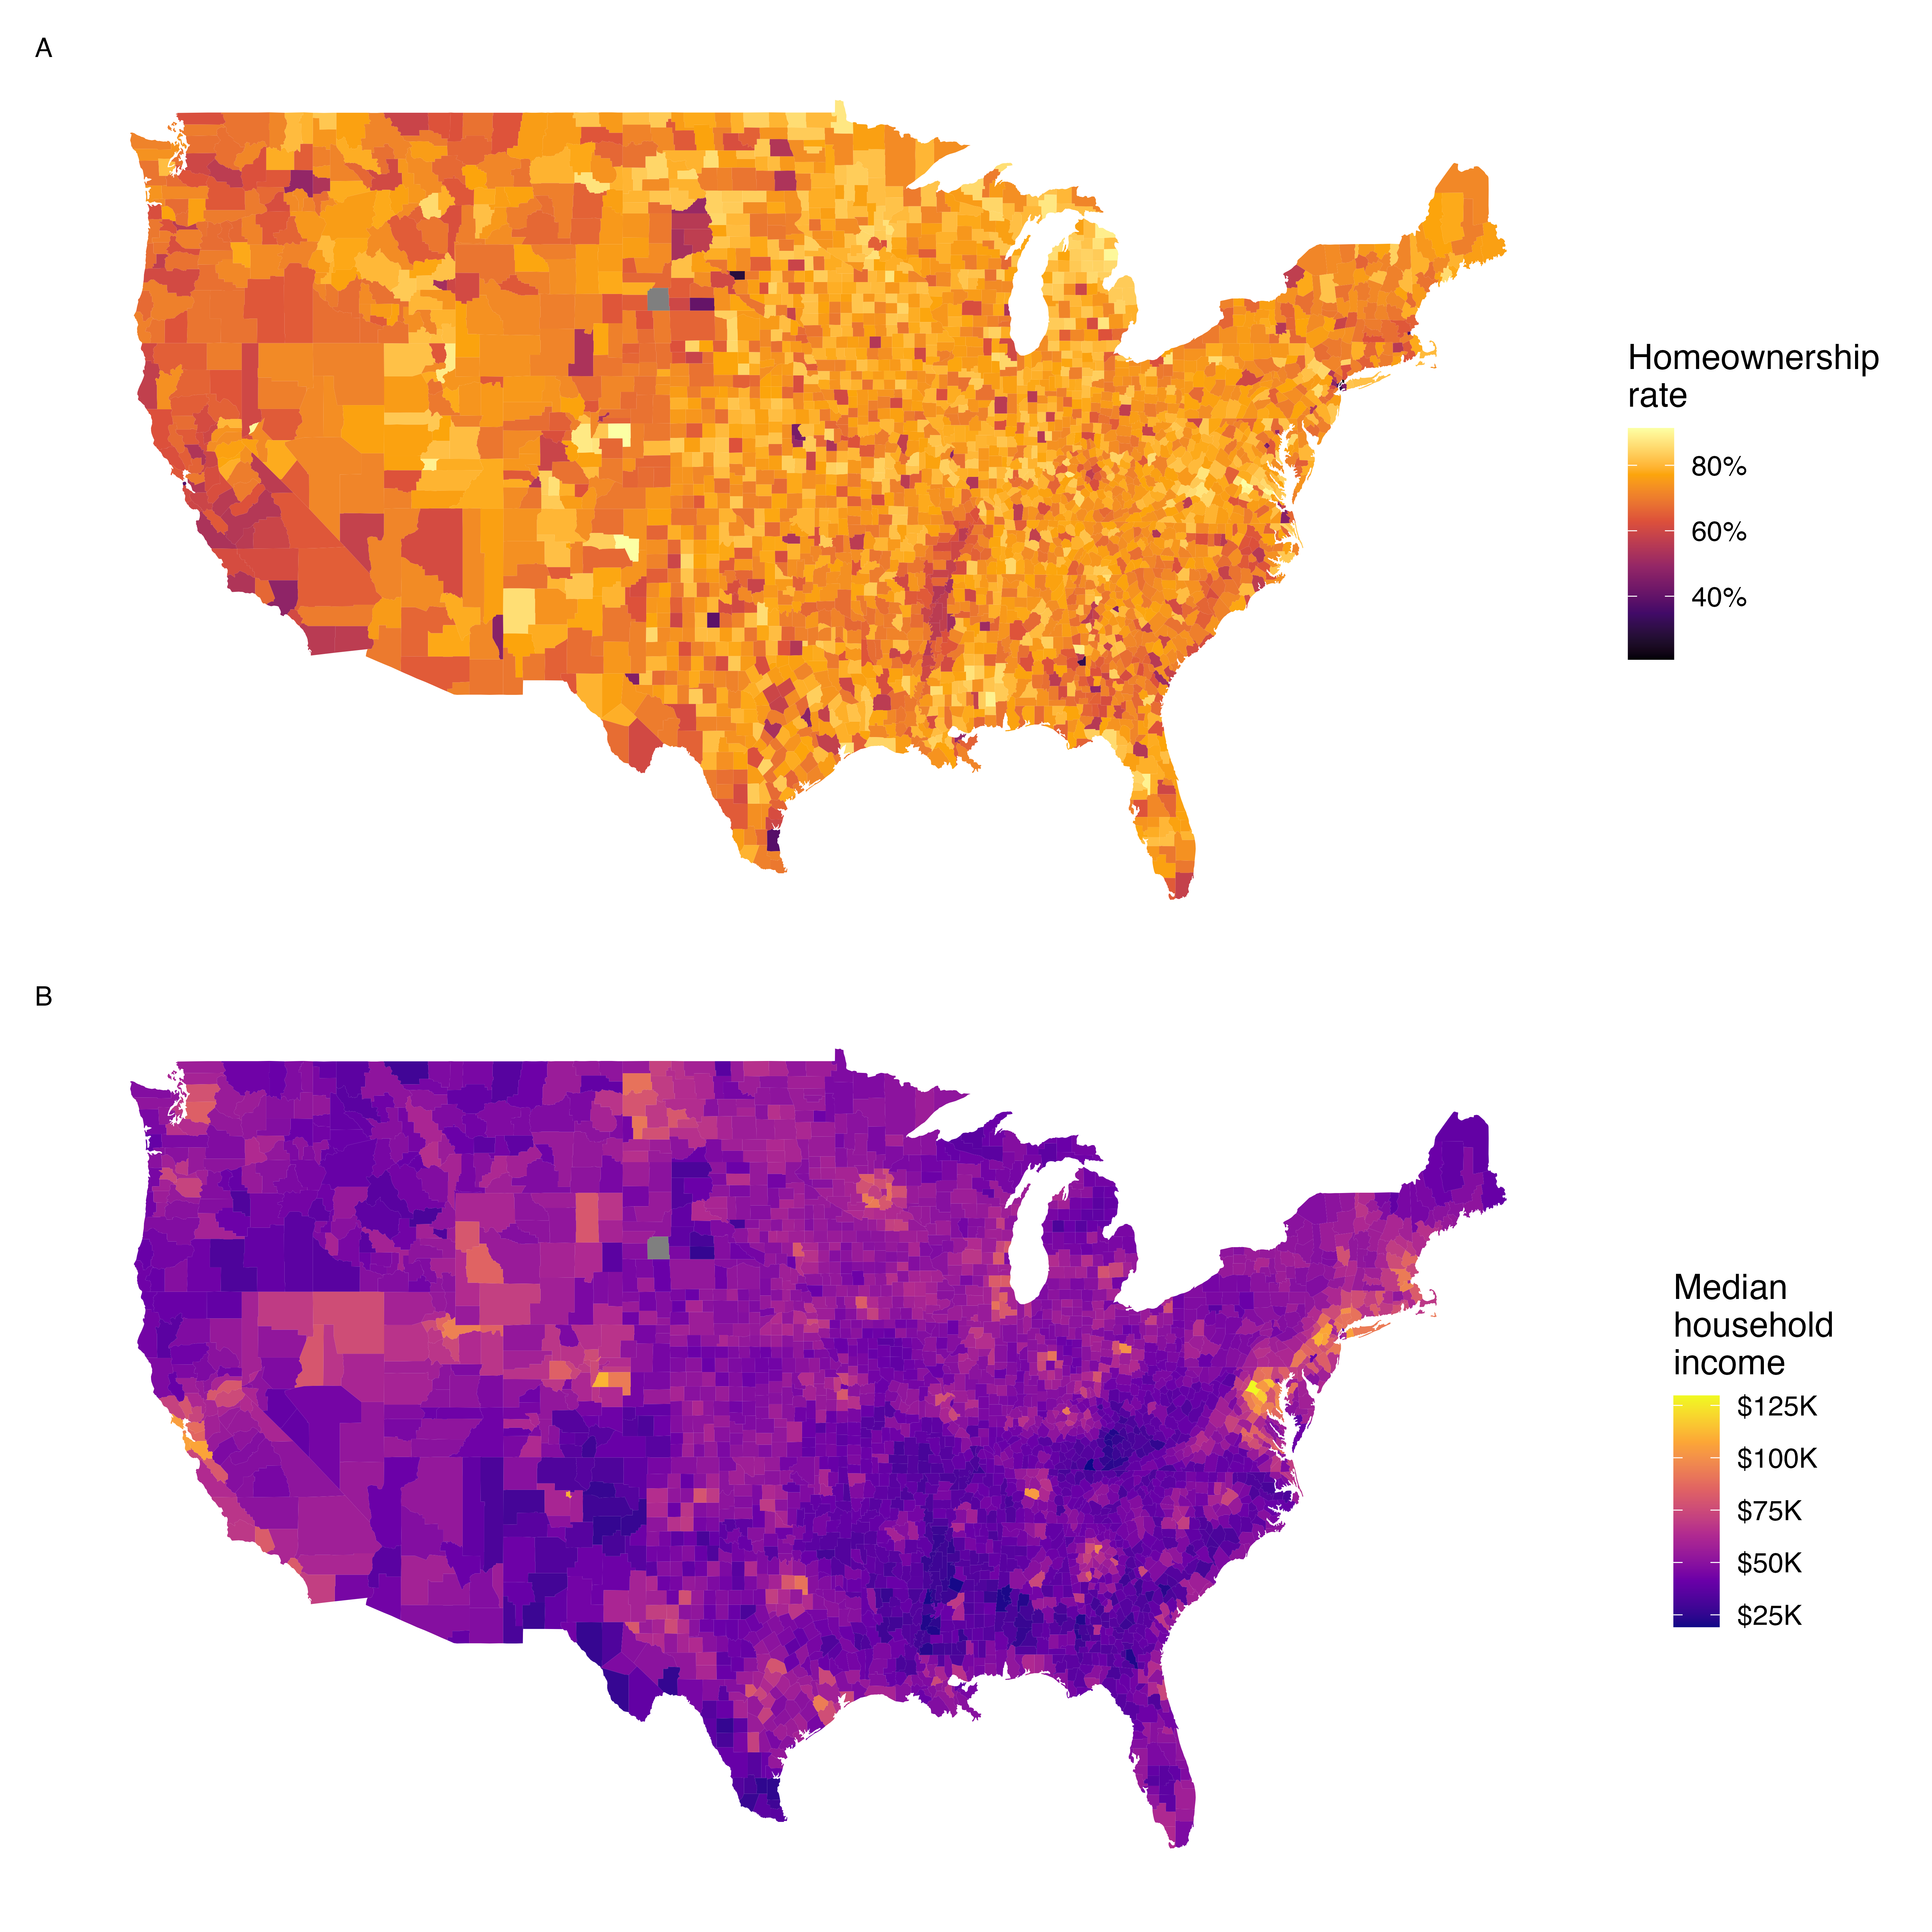 Plot A: Intensity map of homeownership rate (percent). Plot B: Intensity map of median household income (in thousands of USD).